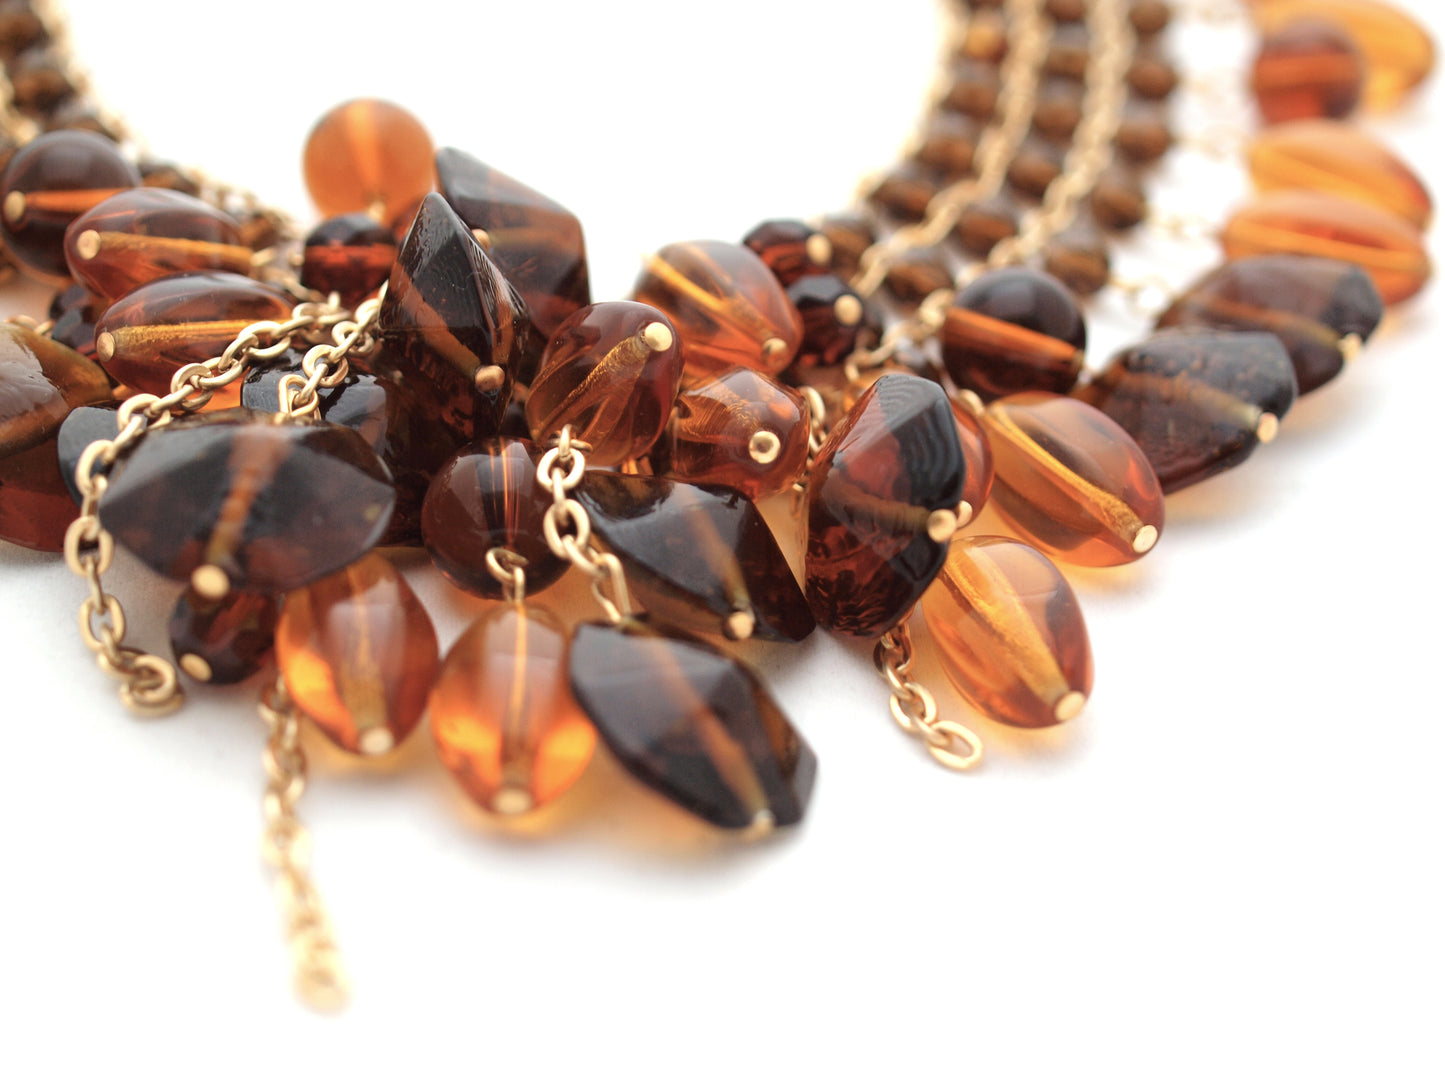 Amber glass Lotus Necklace